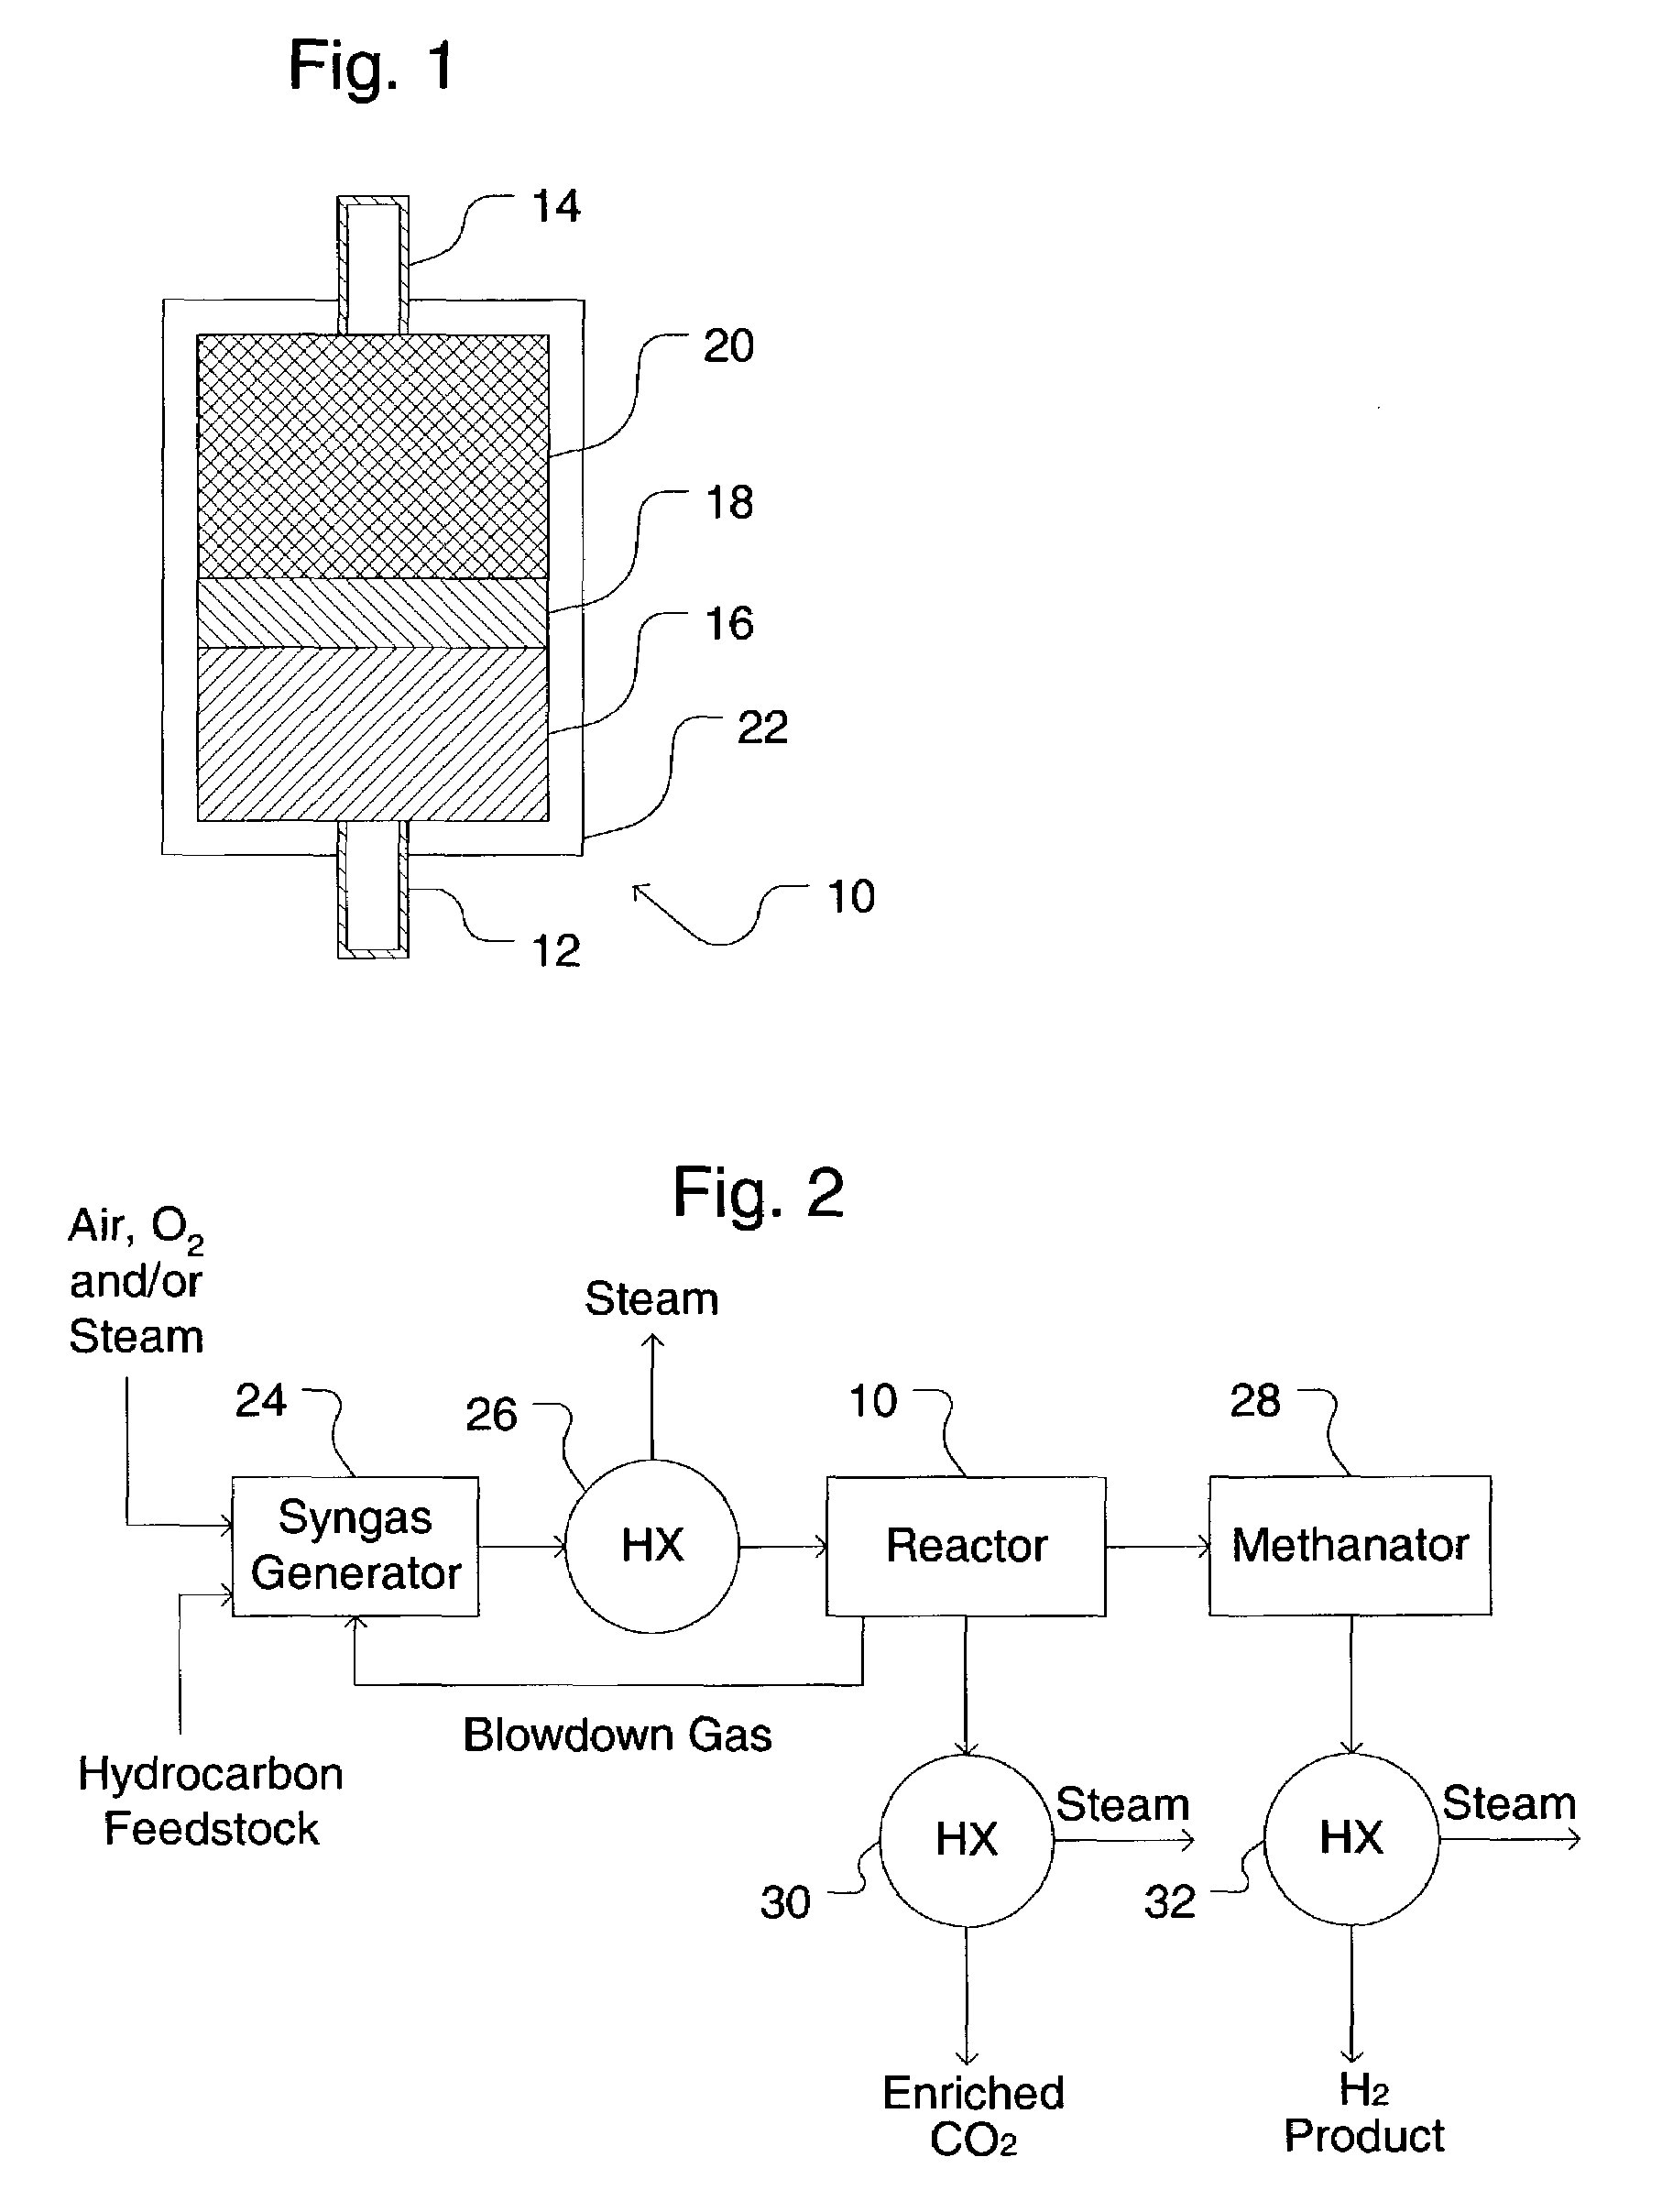 Simultaneous shift-reactive and adsorptive process to produce hydrogen